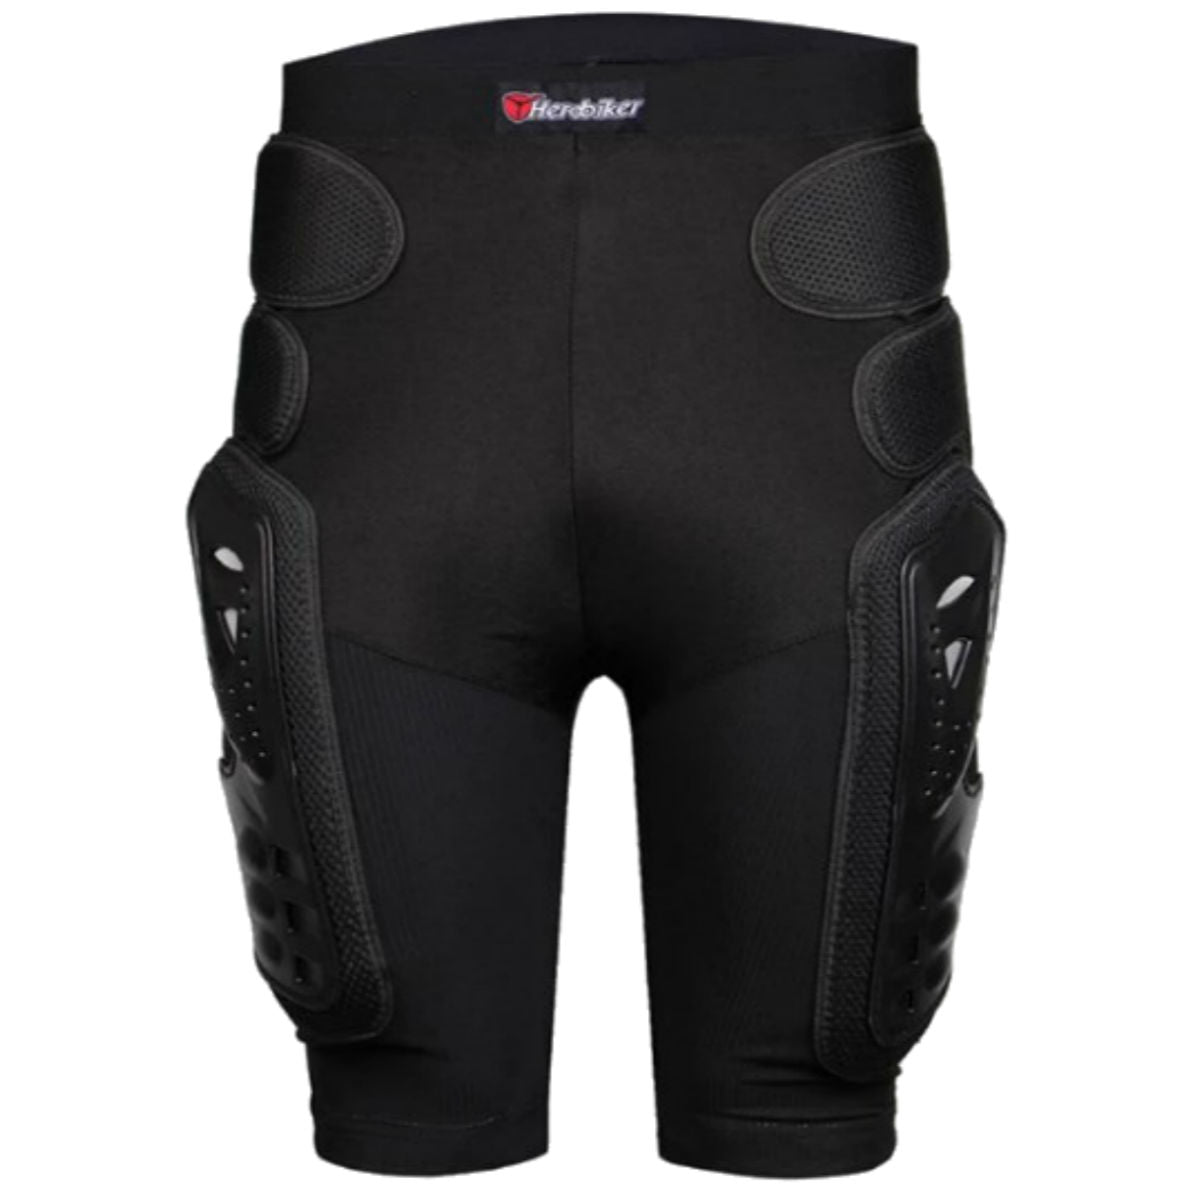 The Motorcycle Protective Armor Pants for Men & Women, providing reliable protective gear with knee pads.